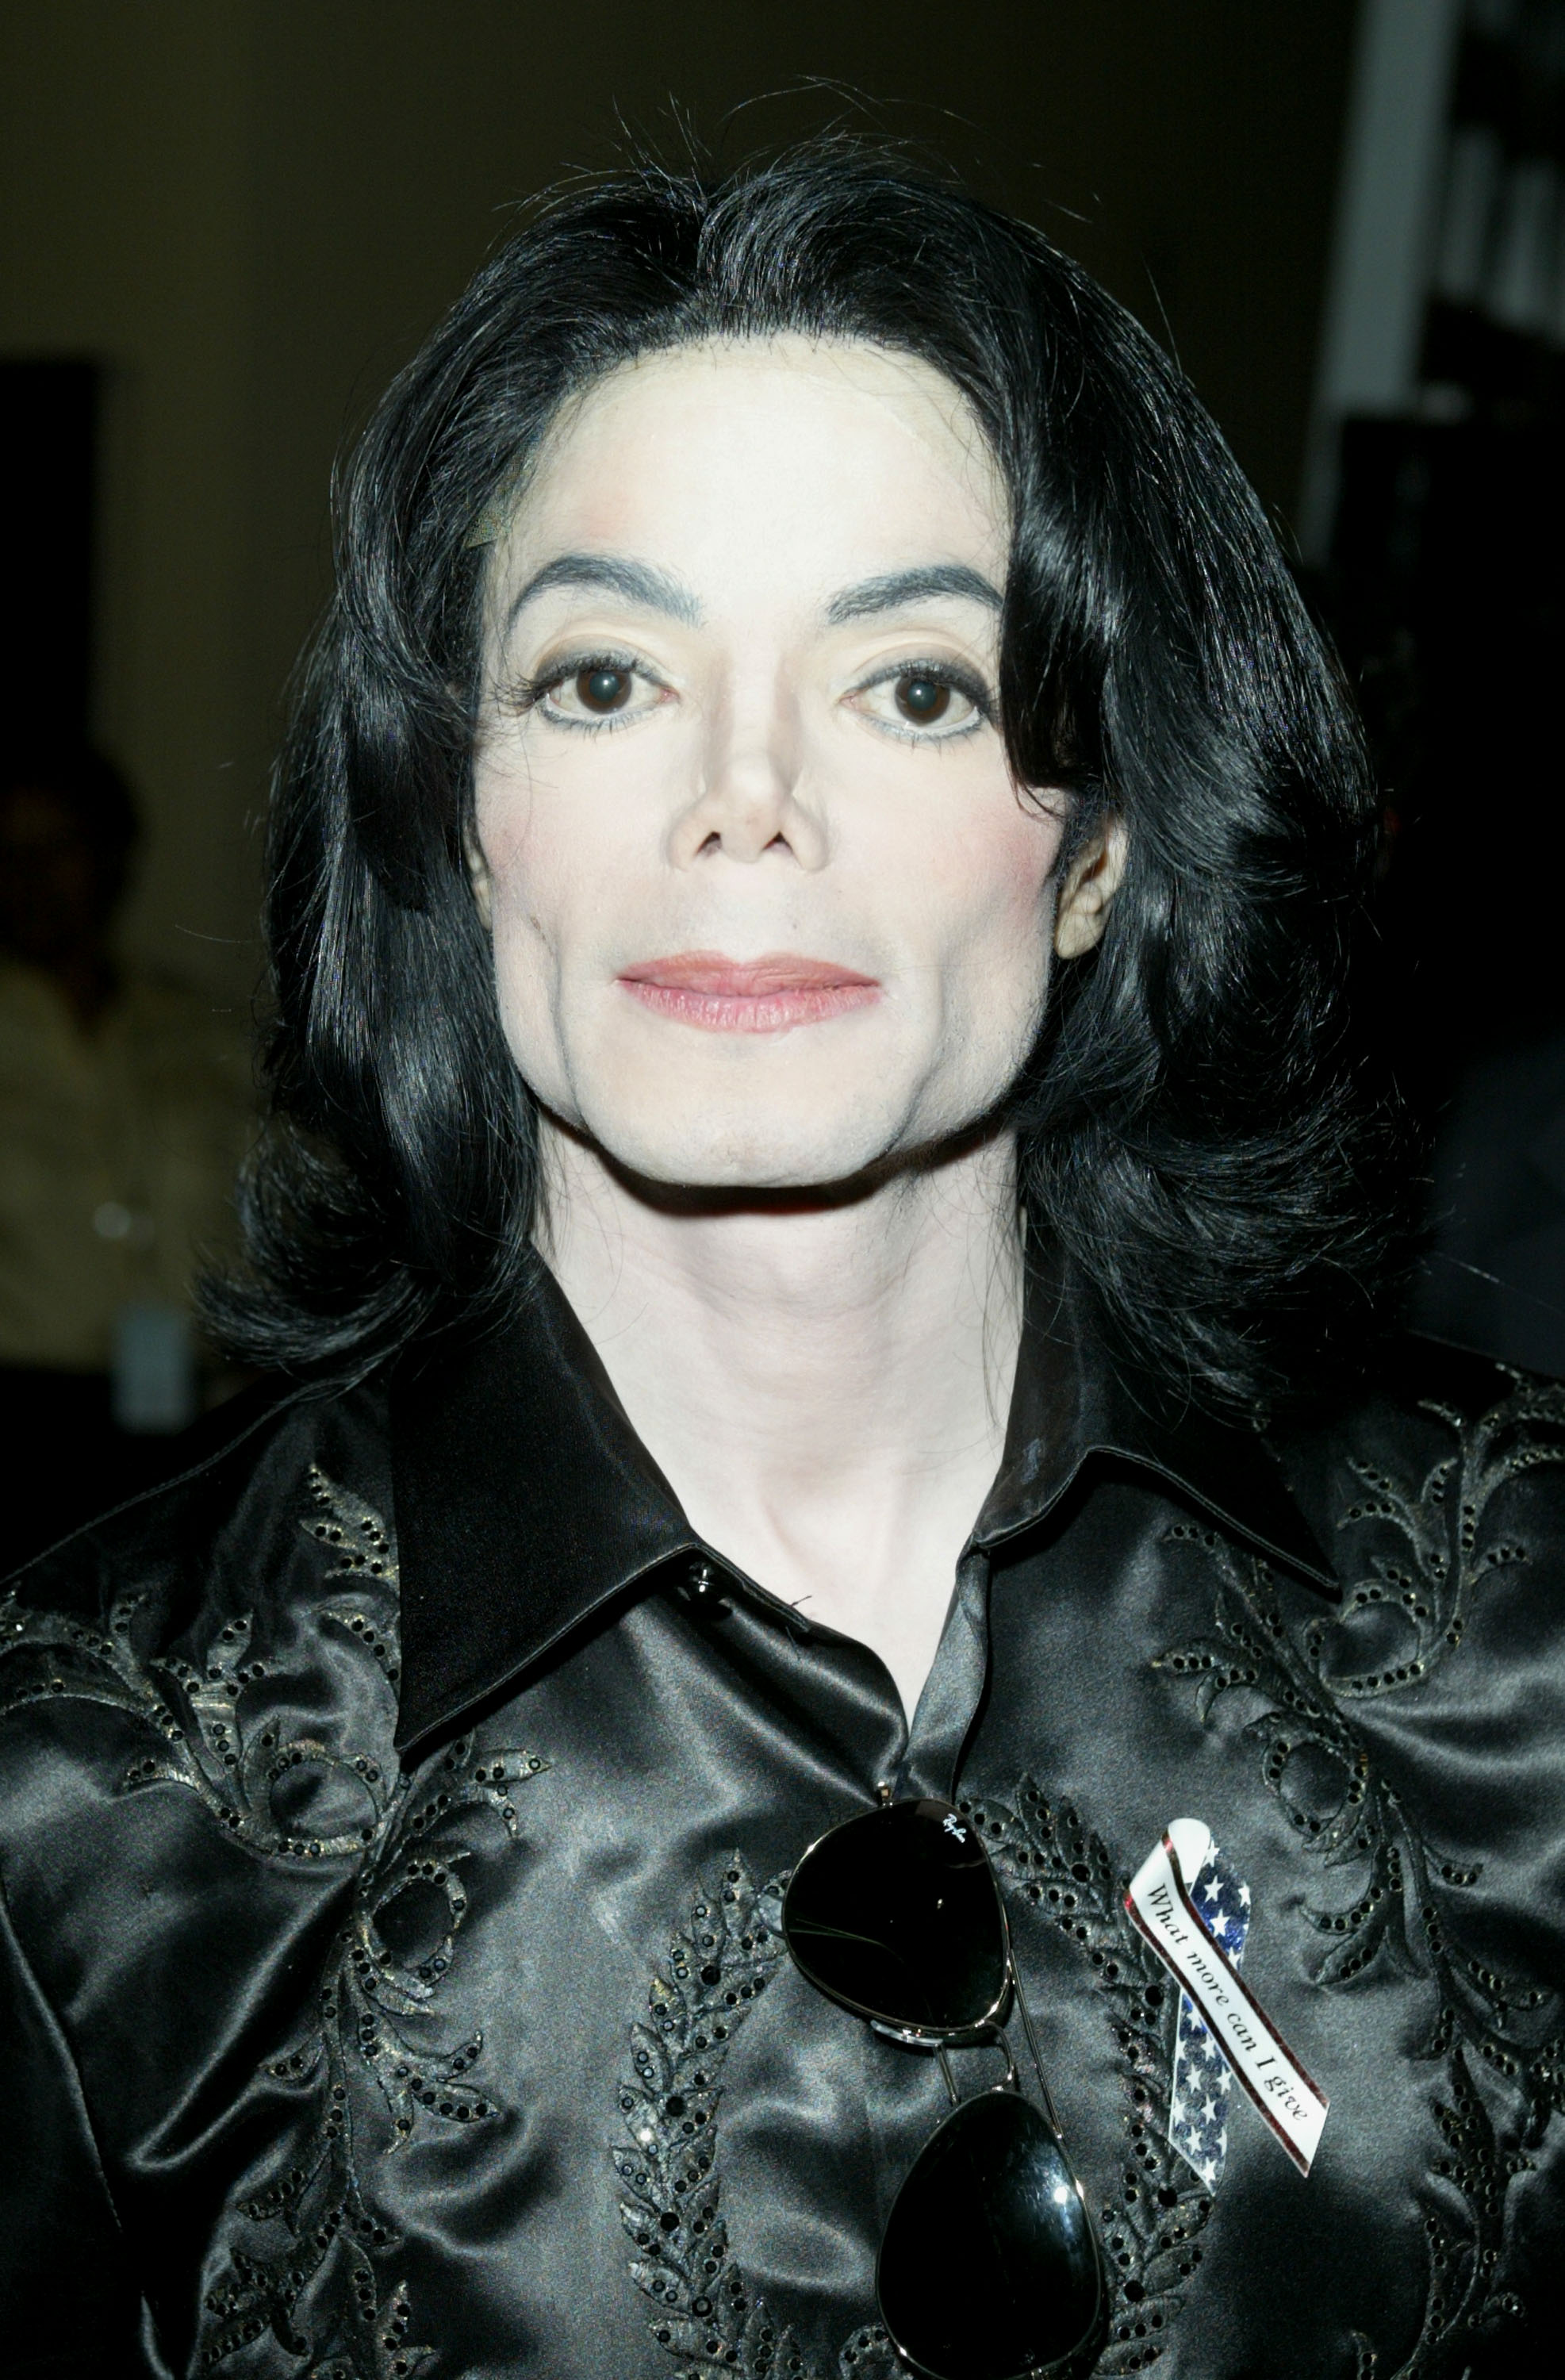 Michael Jackson at The 2003 Radio Music Awards on October 27, 2003 in Las Vegas, Nevada | Source: Getty Images